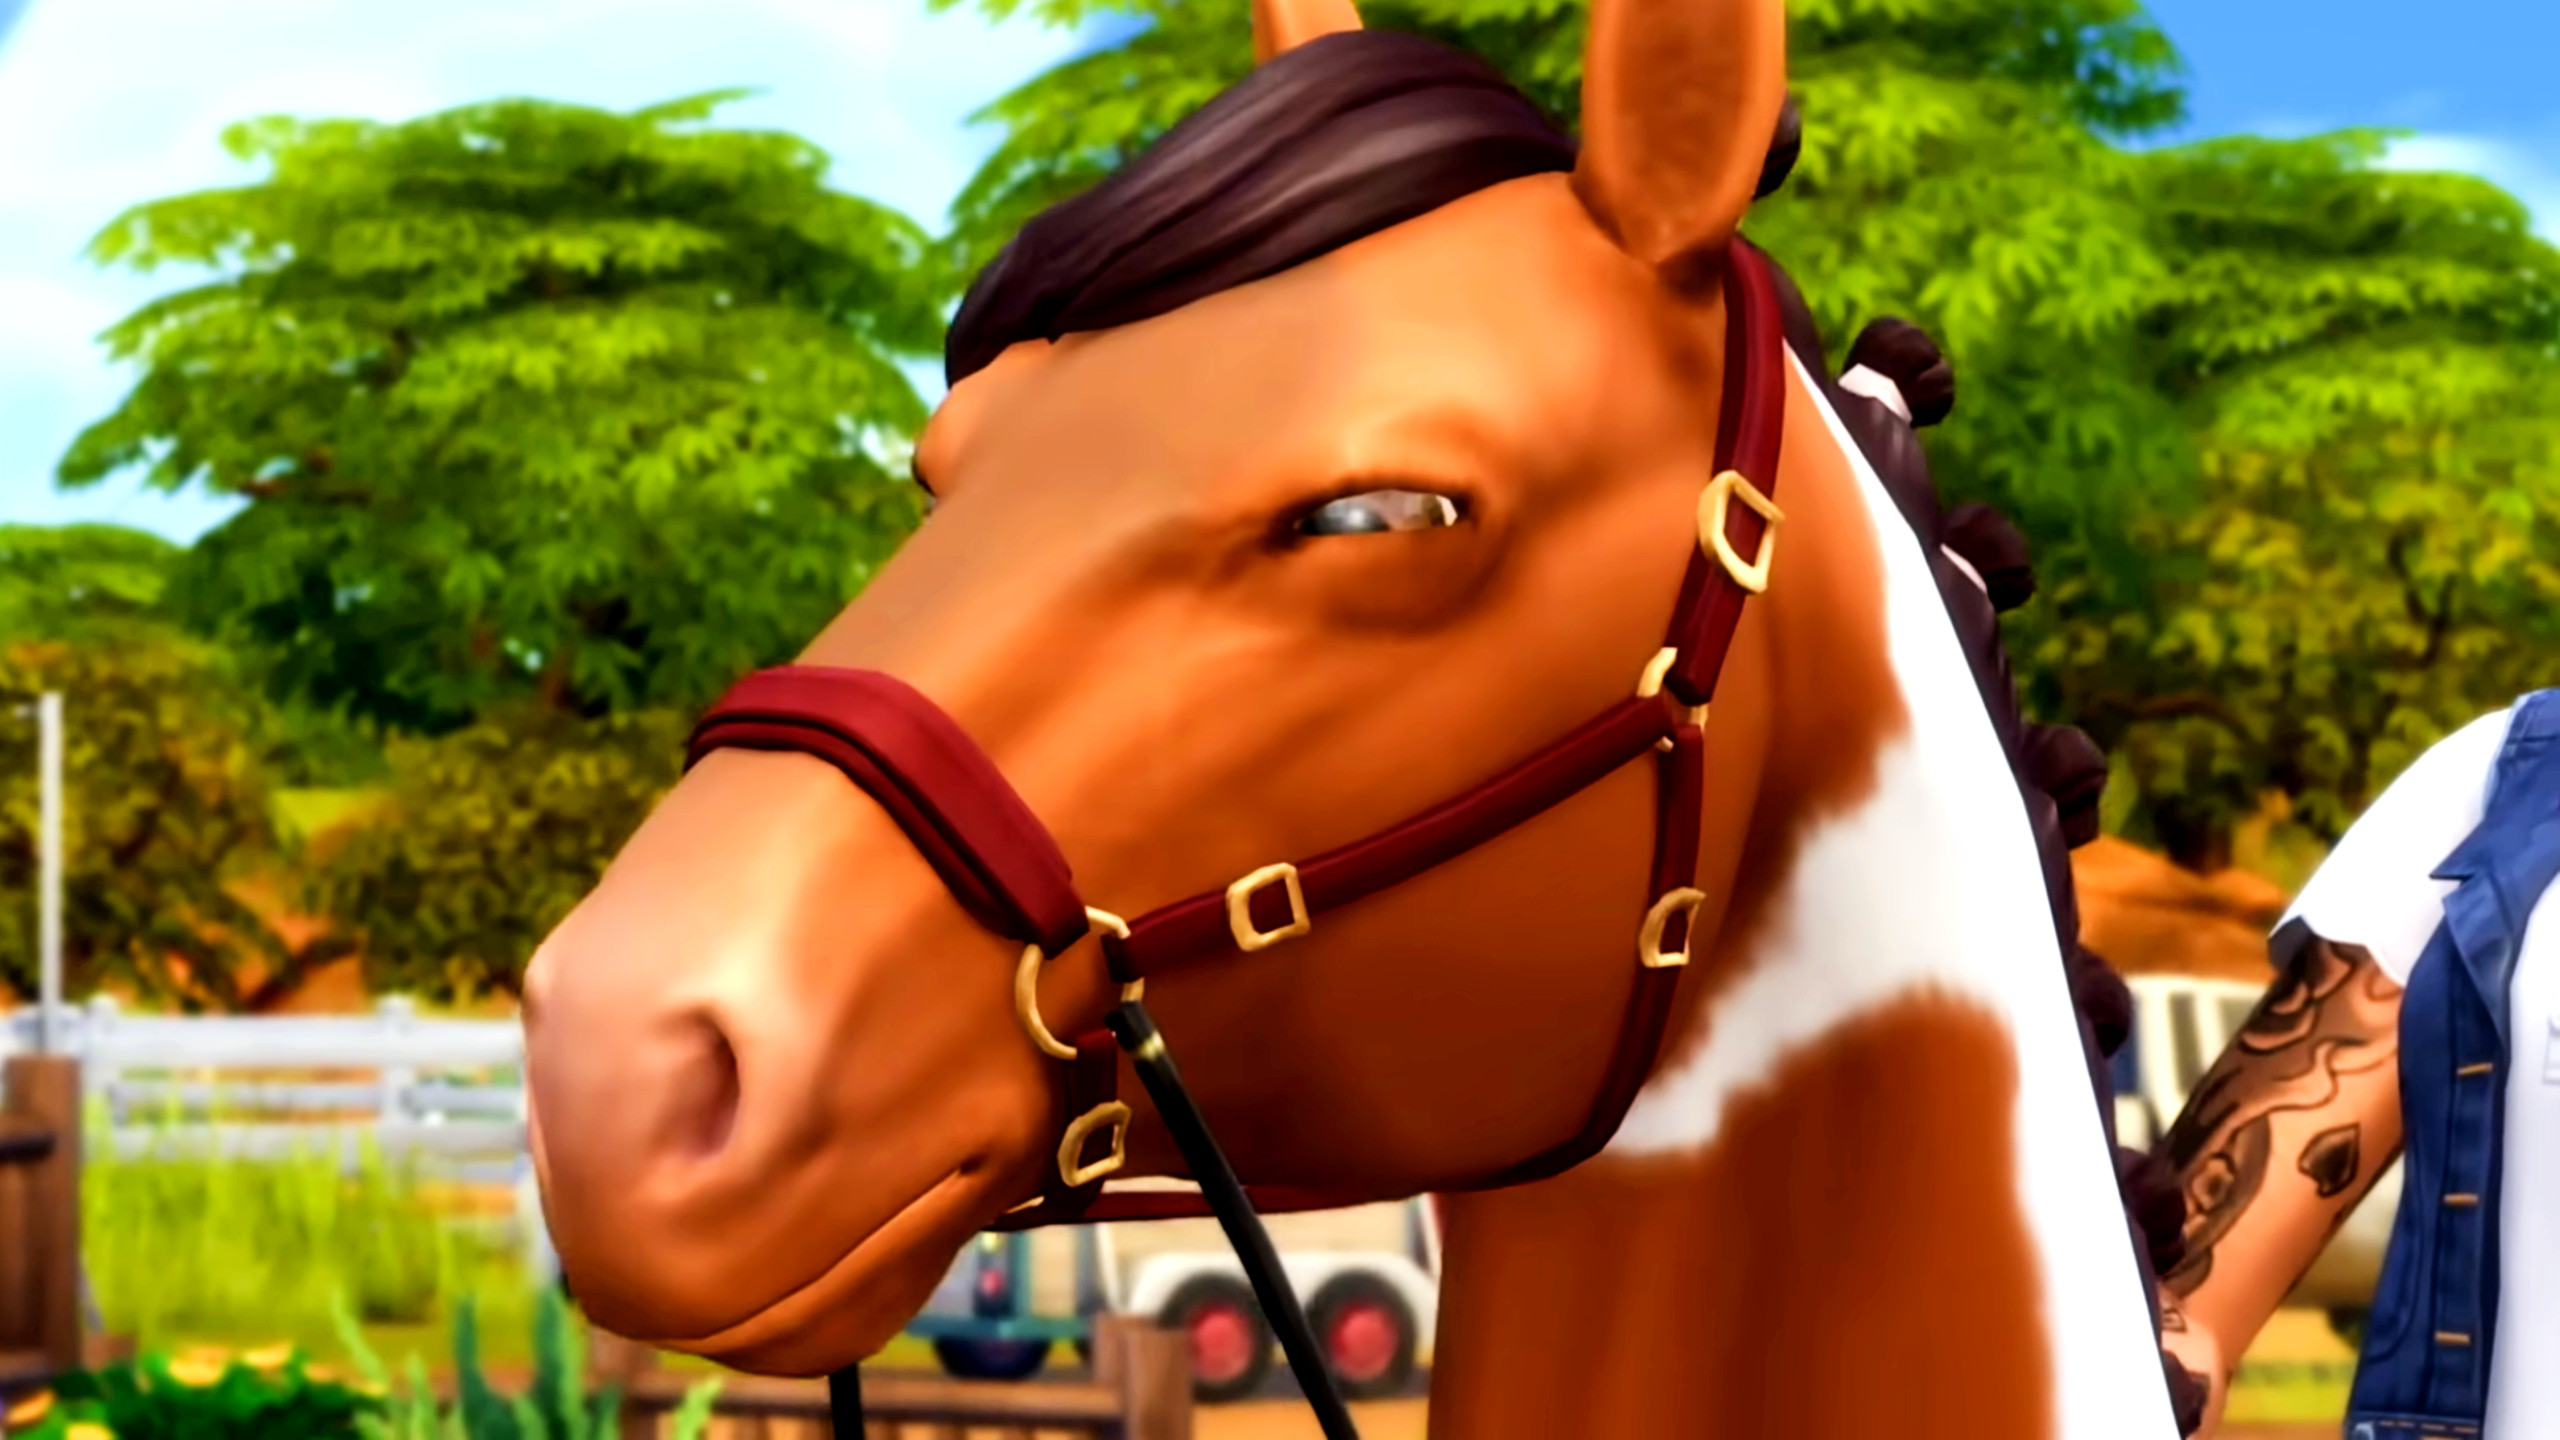 HORSES UPDATE NOW LIVE  Horses, Training, Bidding, New Hats and More! news  - Ranch Simulator - ModDB